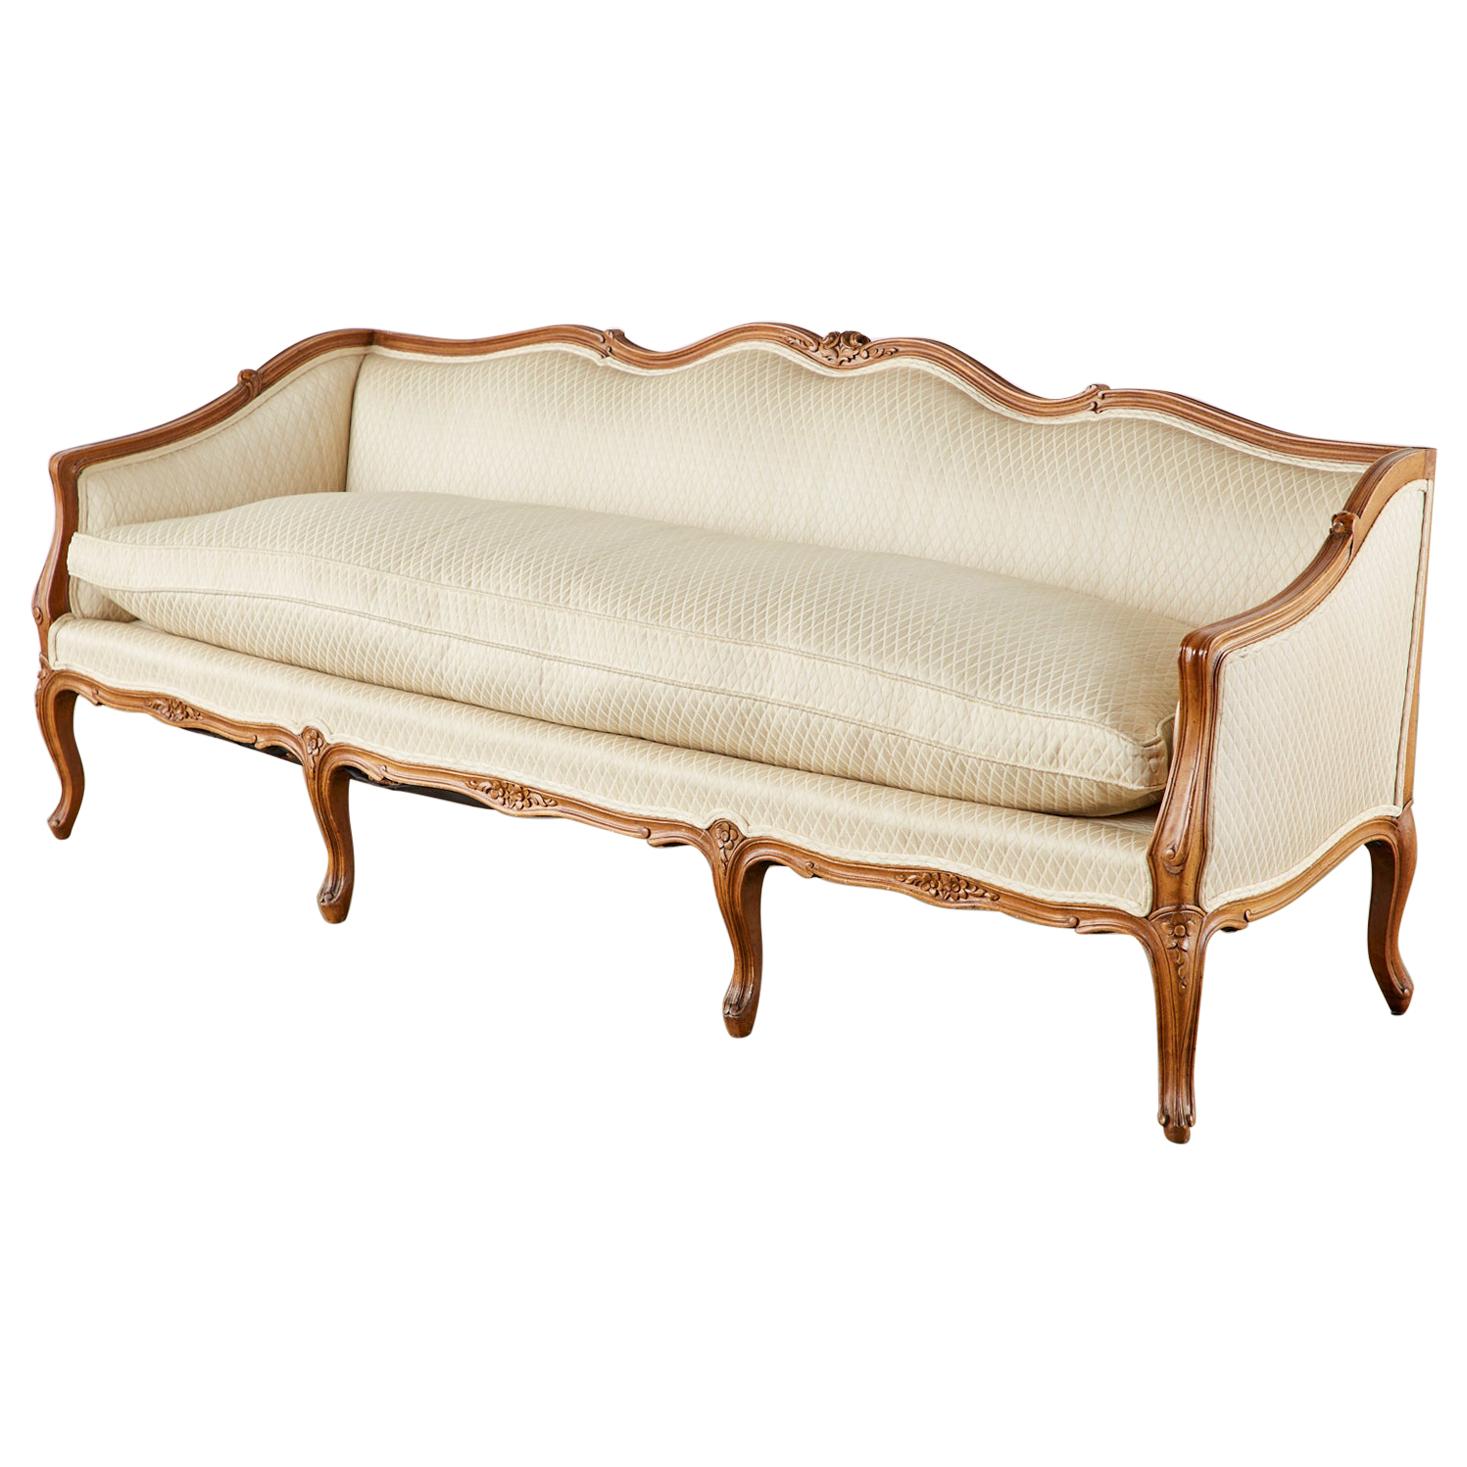 French Louis XV Provincial Style Carved Serpentine Sofa